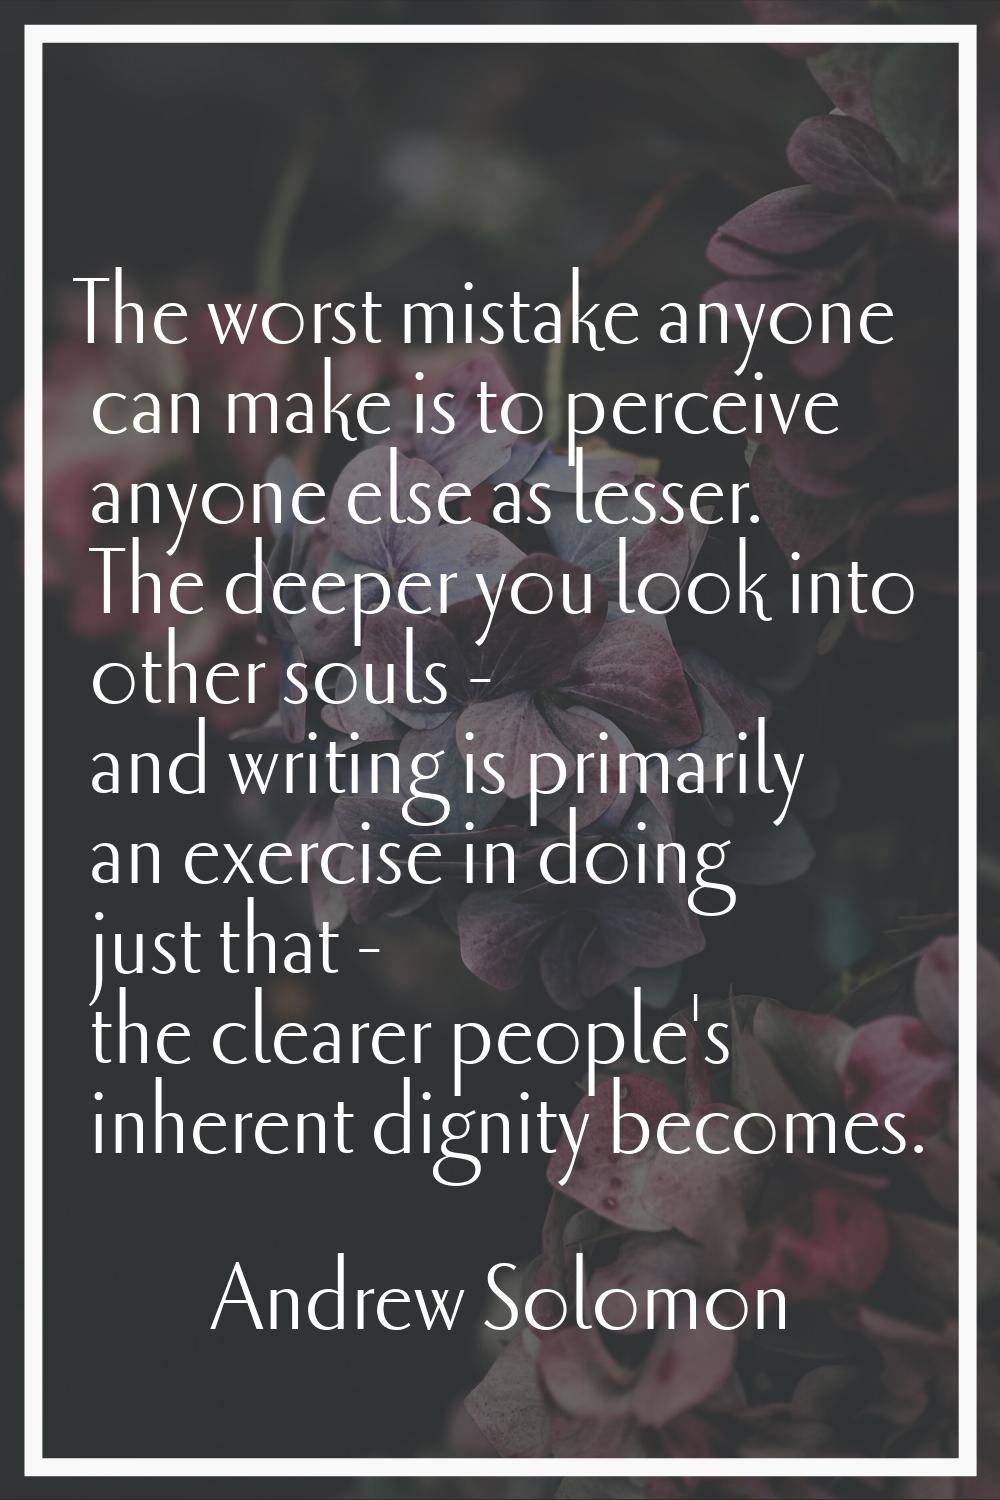 The worst mistake anyone can make is to perceive anyone else as lesser. The deeper you look into ot